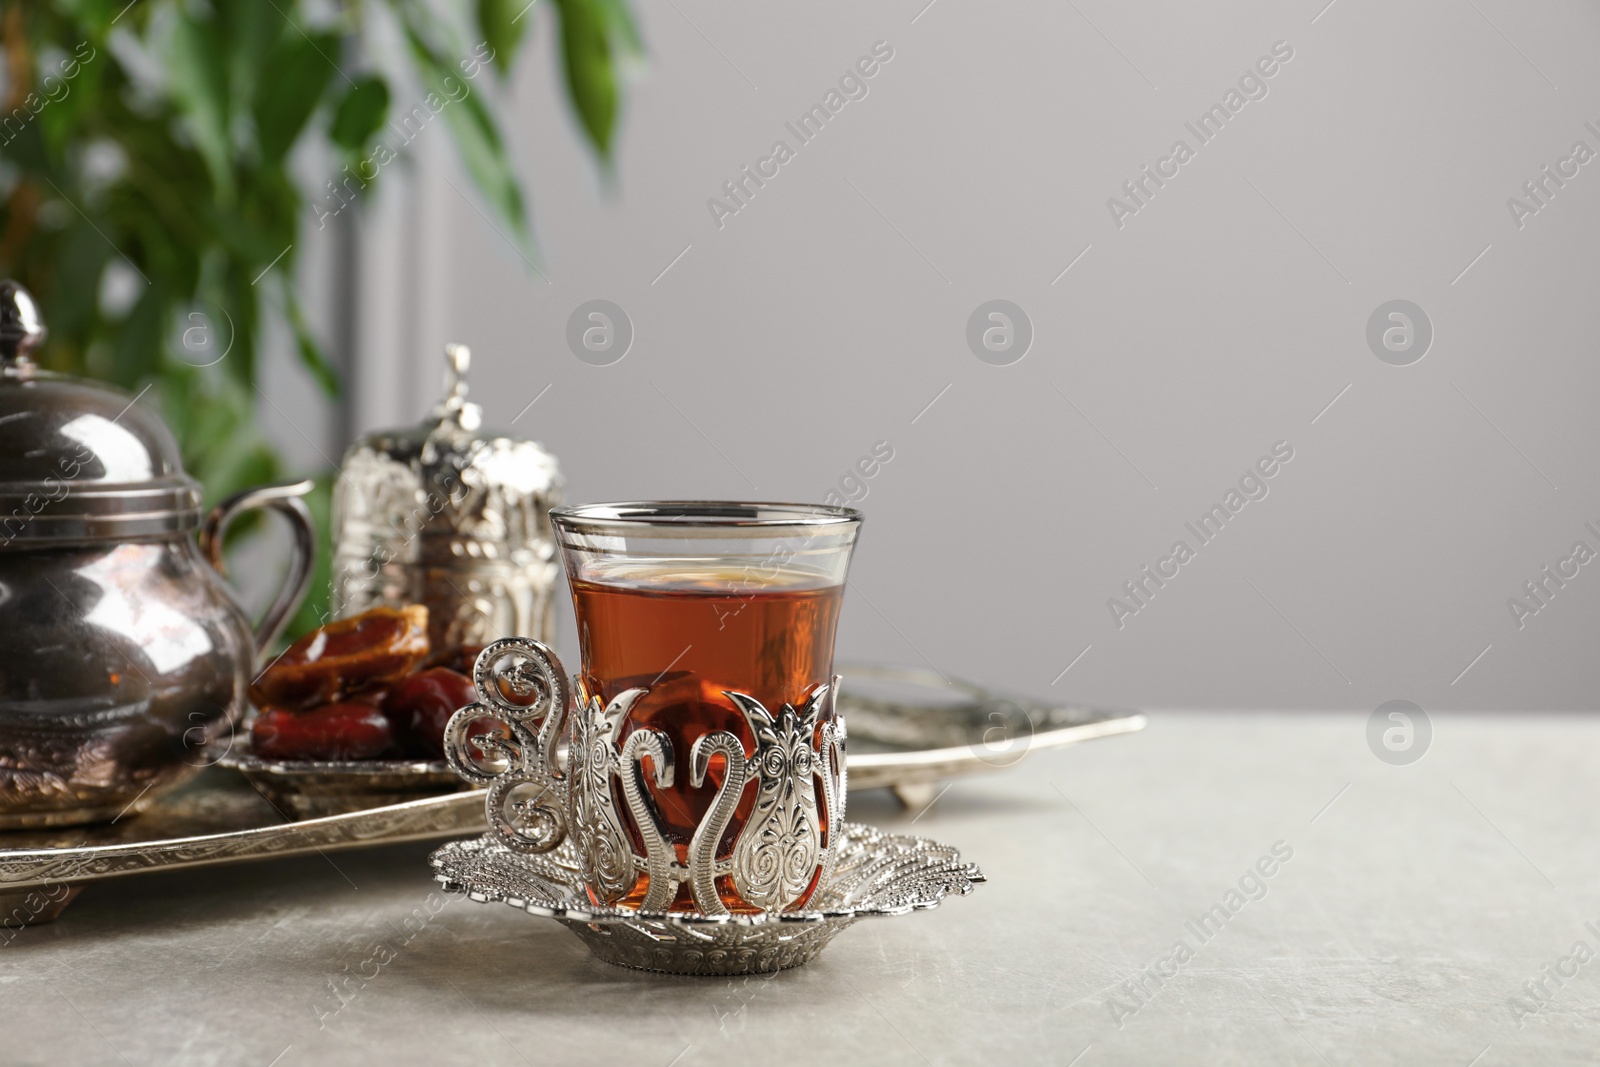 Photo of Tea and date fruits served in vintage tea set on grey table, space for text